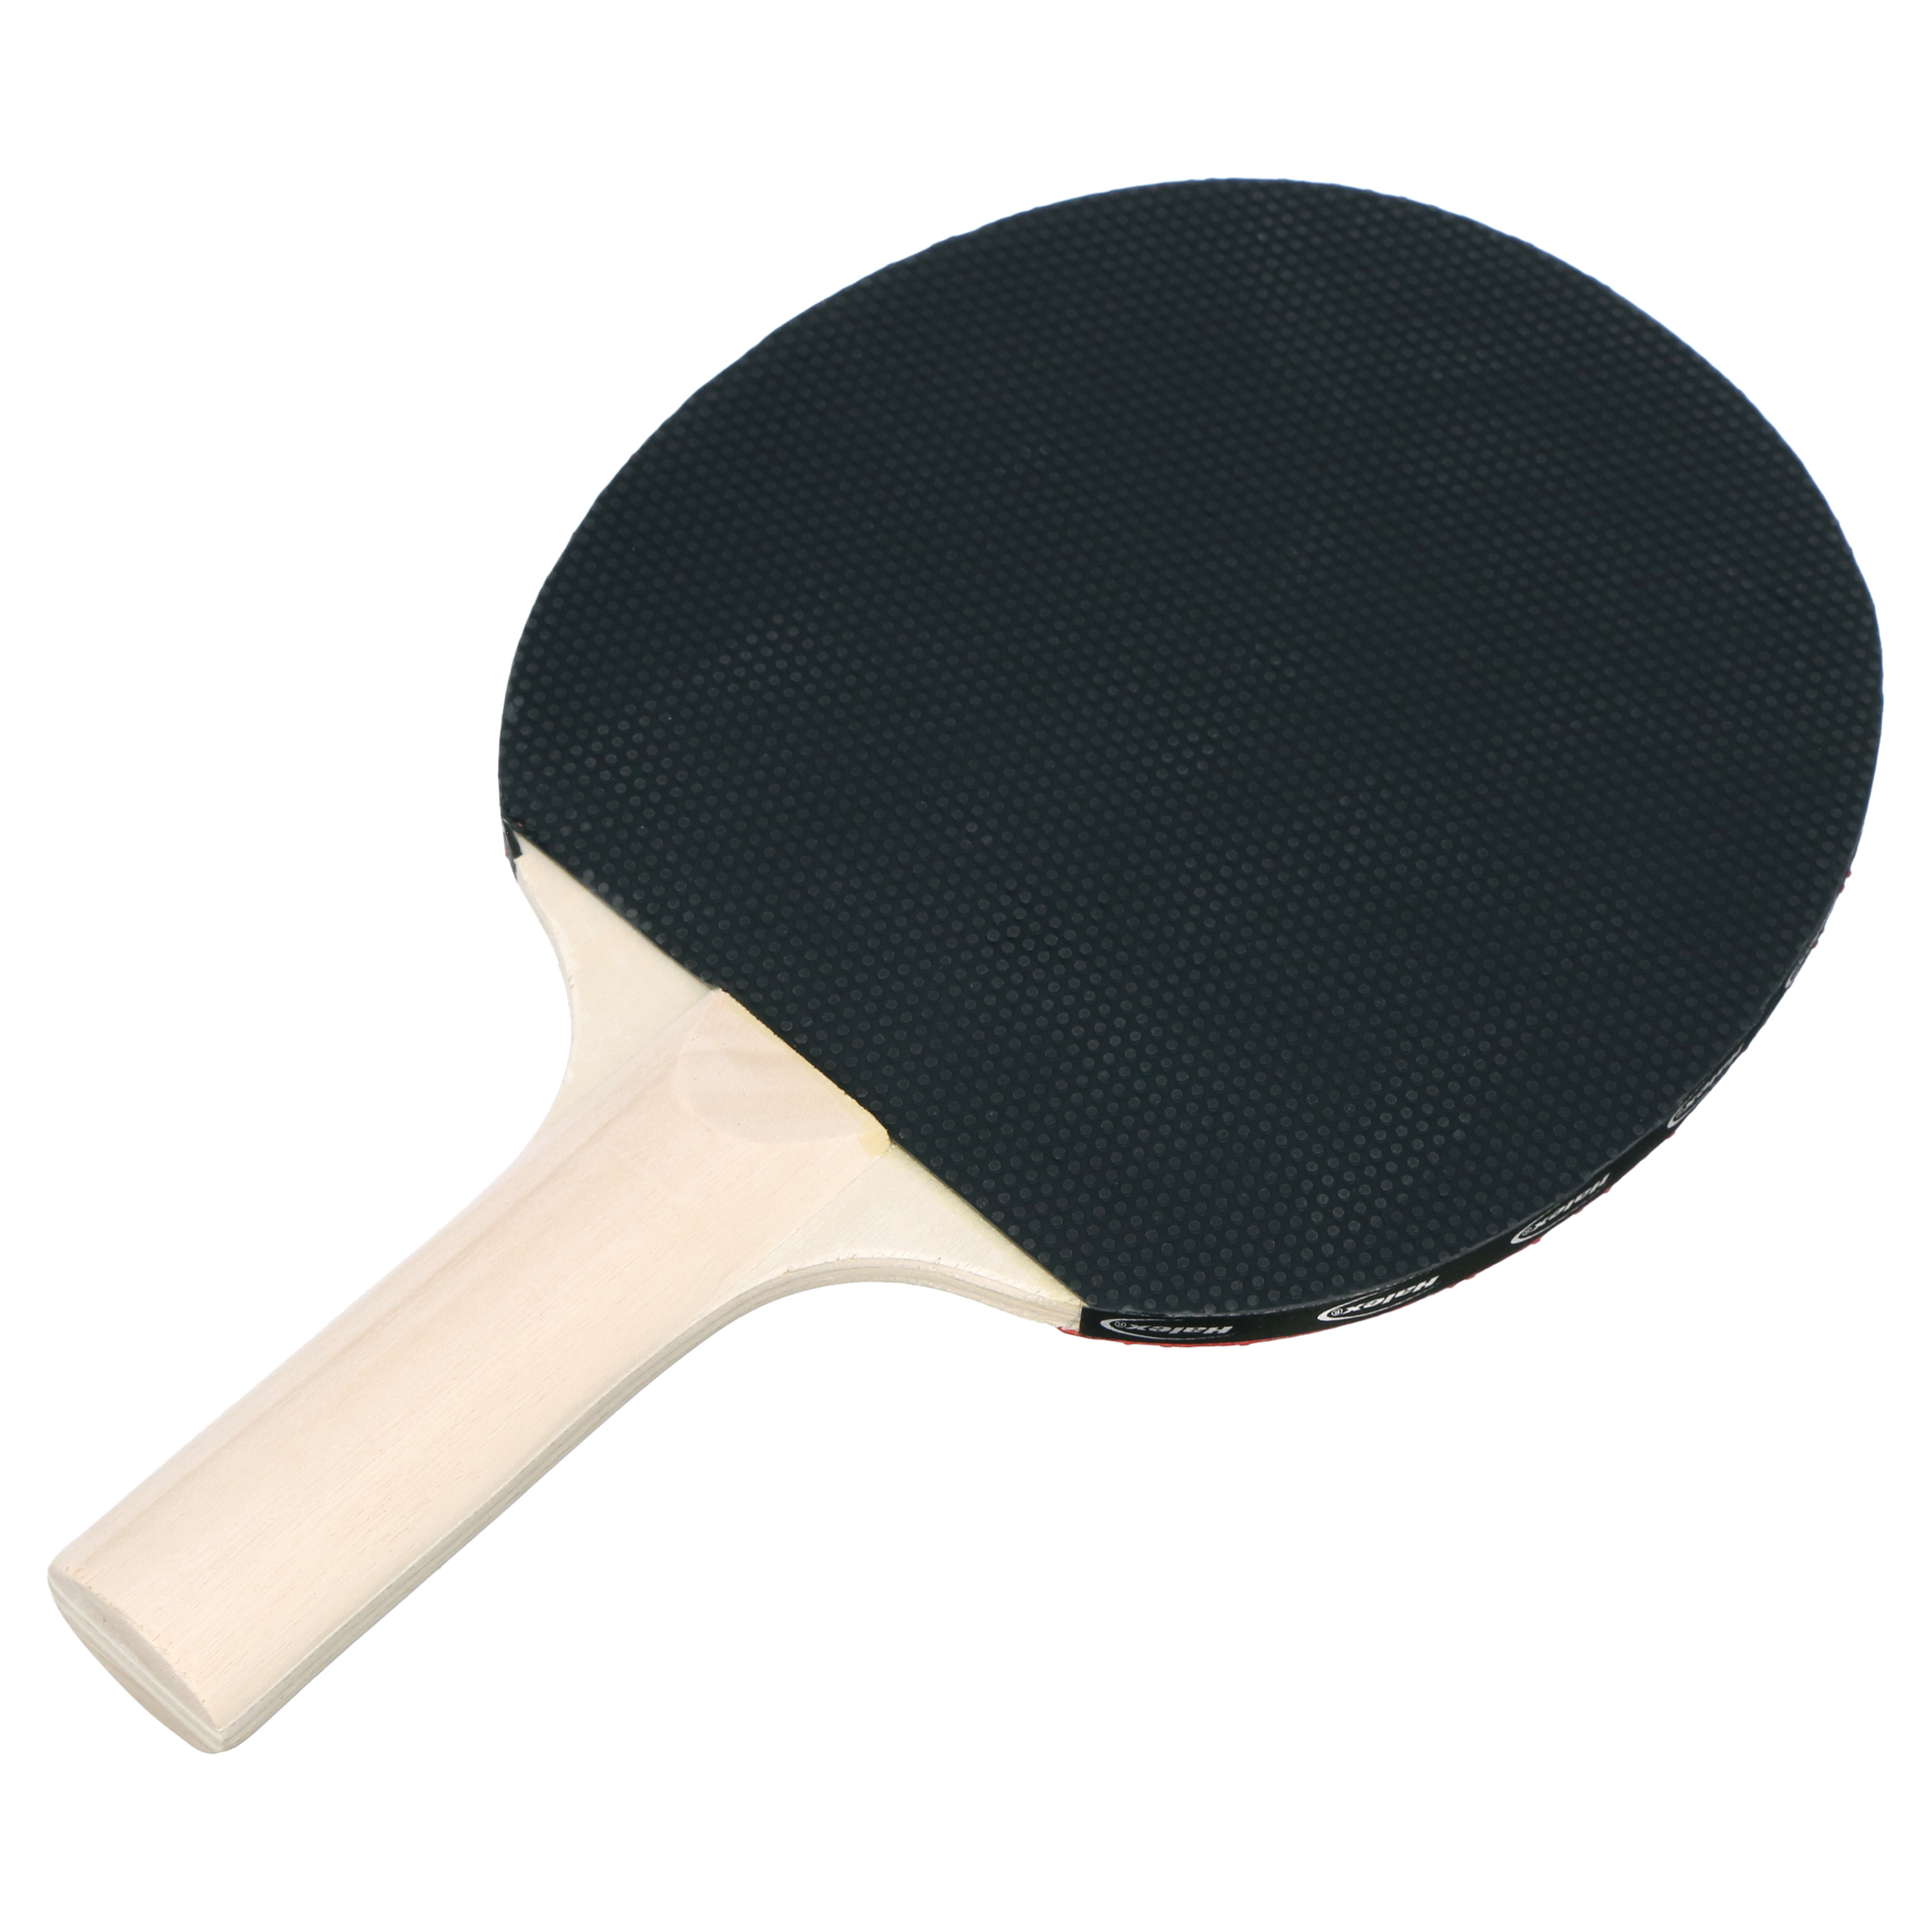 Halex Velocity Table Tennis Paddle, One Paddle, Wooden Handle - image 3 of 6